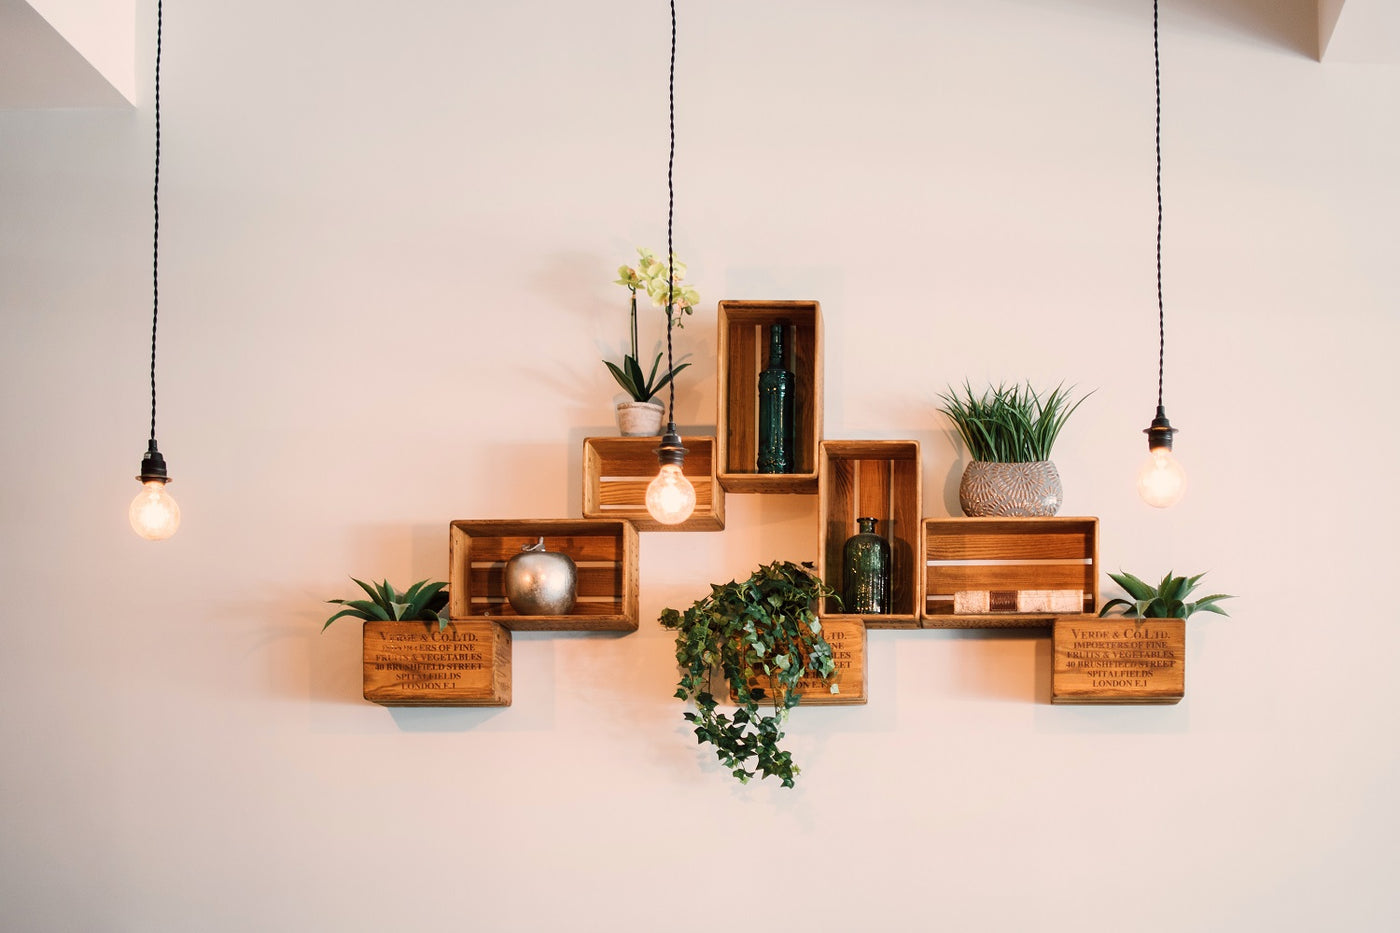 Decoration on the wall from wooden boxes and plants inside